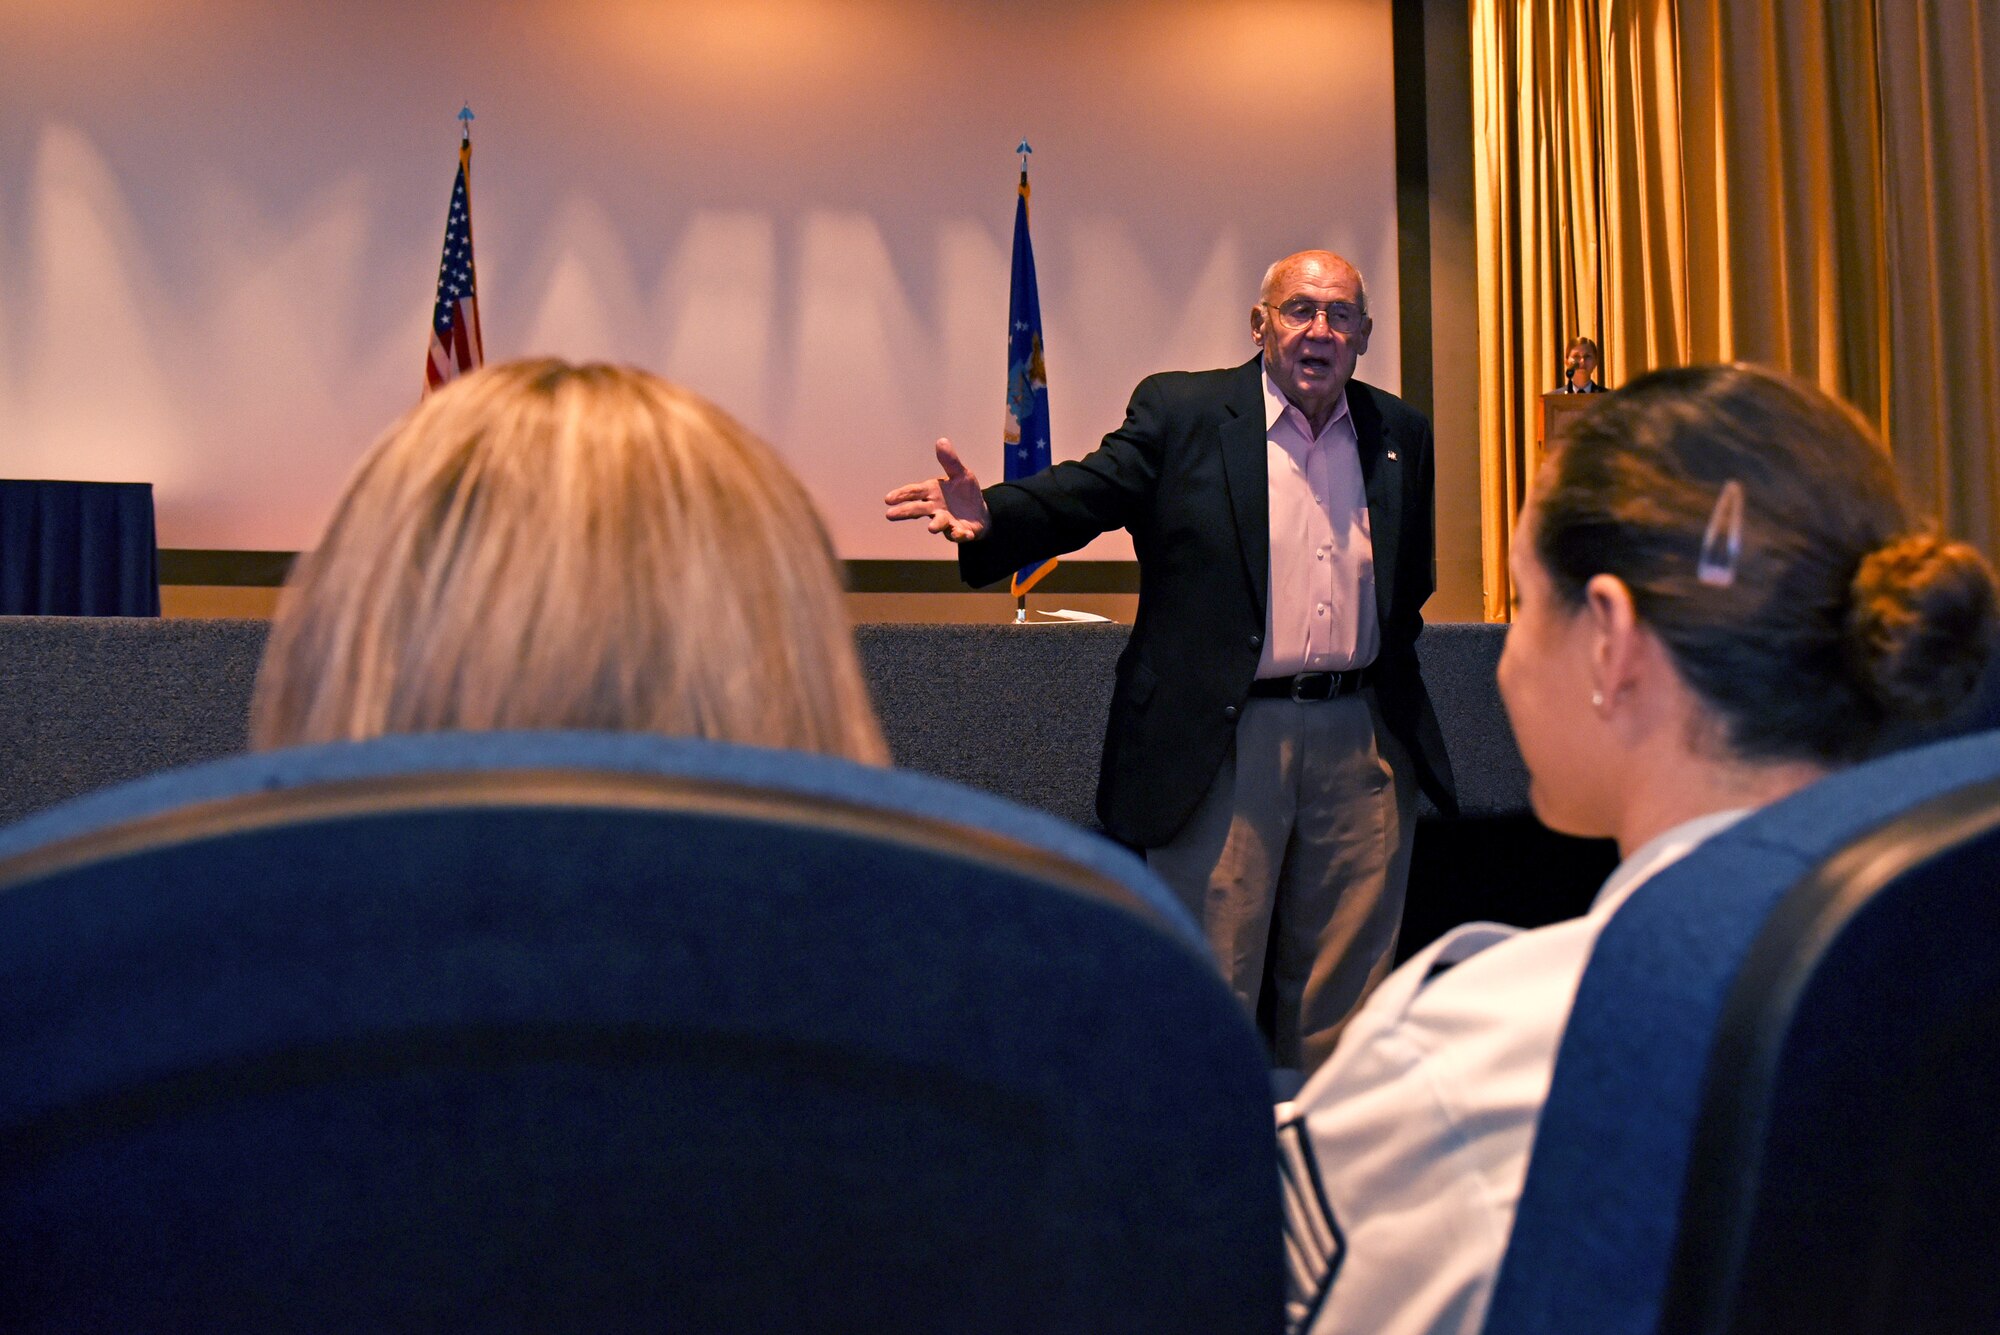 Retired U.S. Air Force Col. Charles Powell, former 17th Training Wing commander, speaks during a Community College of the Air Force graduate ceremony at the base theater on Goodfellow Air Force Base, Texas, June 15, 2018. Every year Powell presents the Powell Warrior Award to a CCAF graduate who has displayed the highest degree of professional military excellence. (U.S. Air Force photo by Staff Sgt. Joshua Edwards/Released)